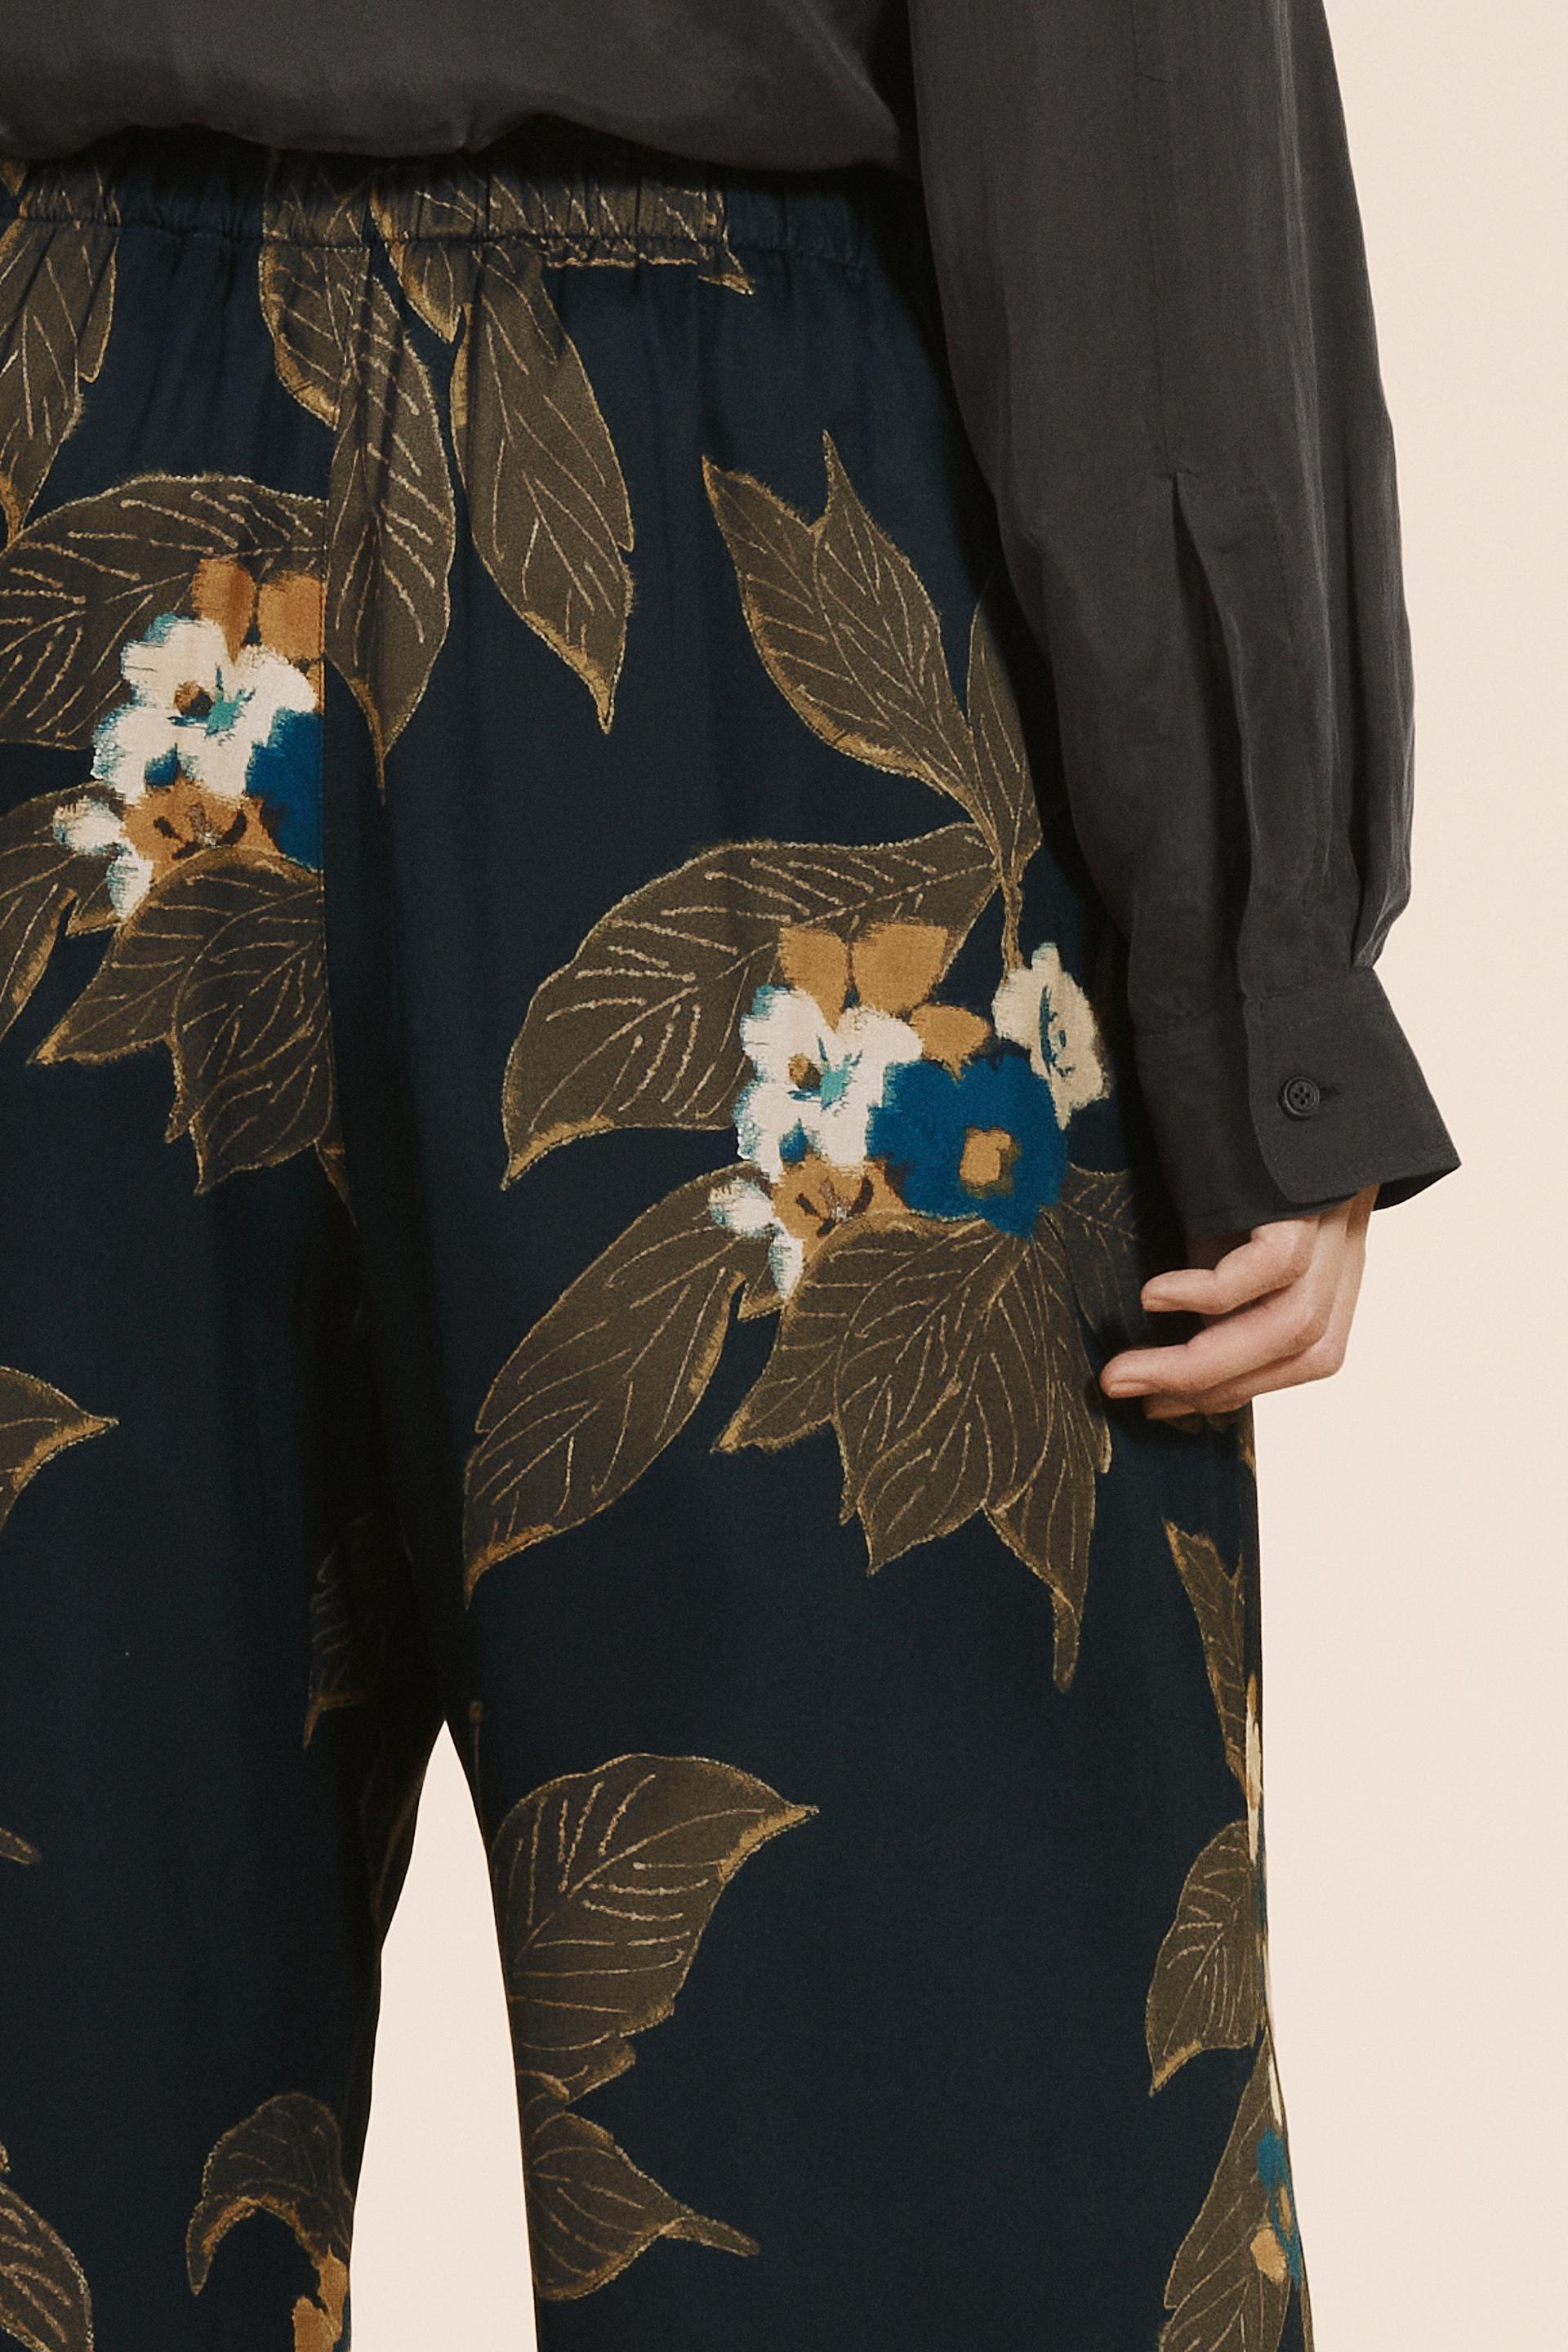 Zara Floral Print Trousers + Style With a Smile Link Up - Style Splash